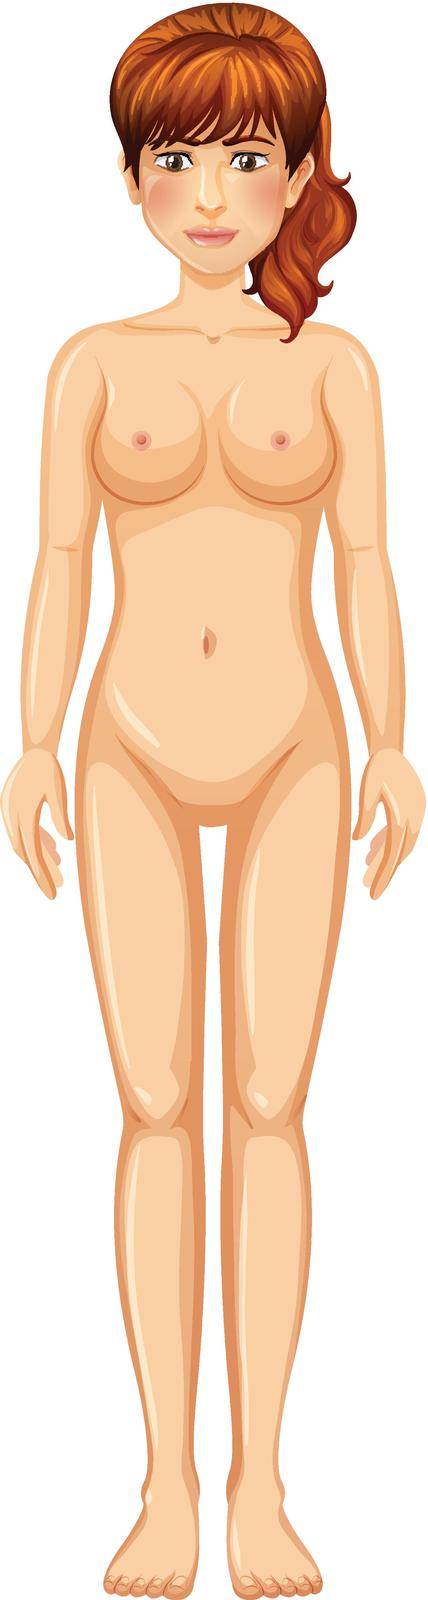 A Woman Body on White Background illustration